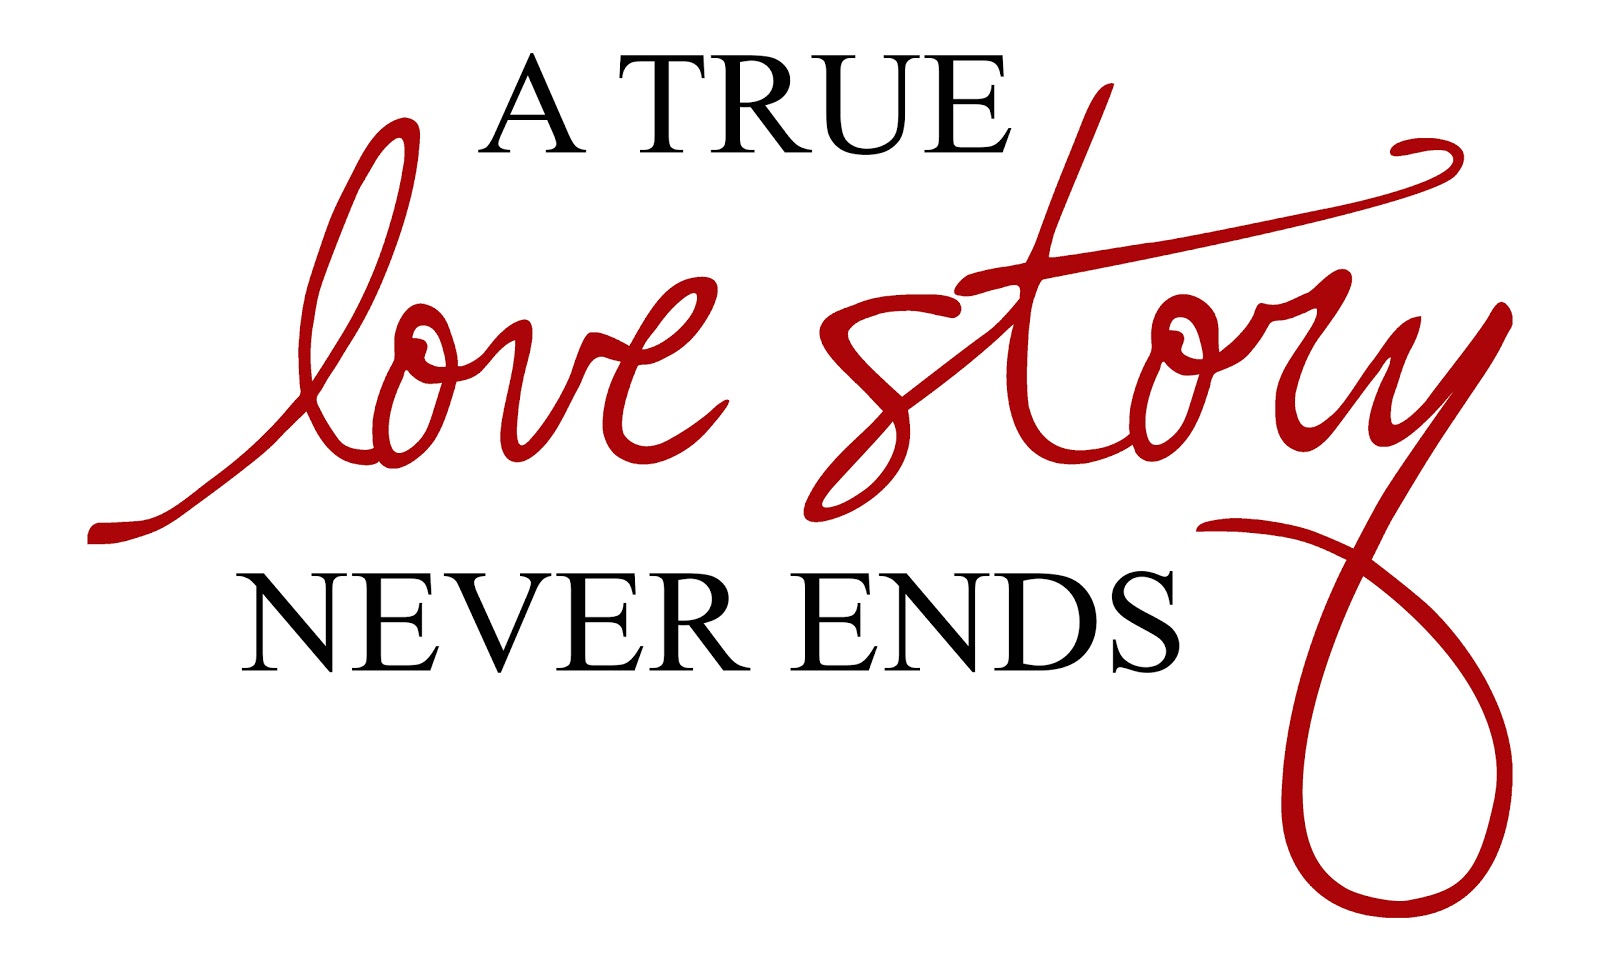 A true love story never ends